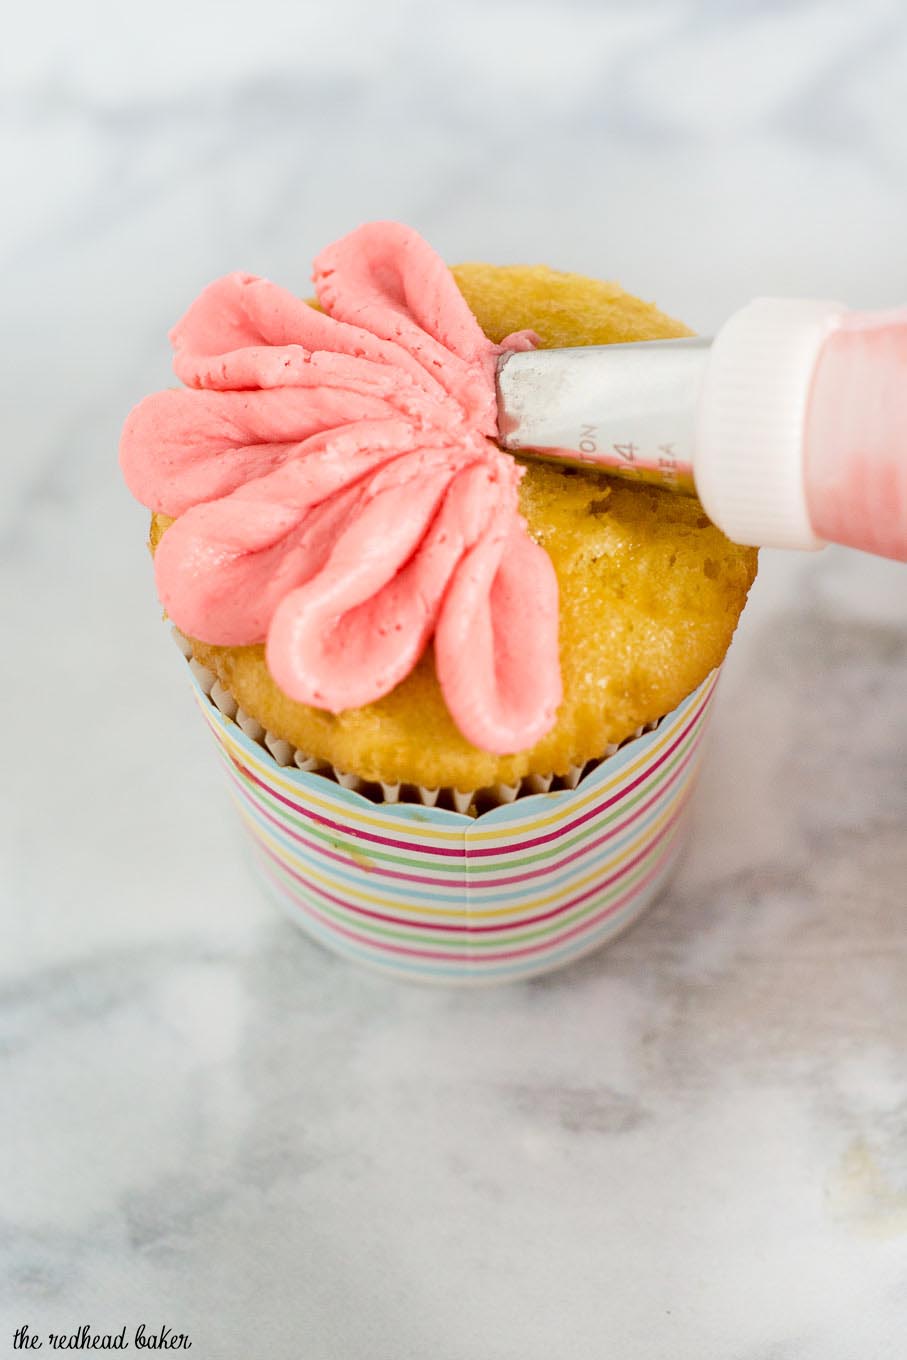 With buttercream icing and a few simple tools, use this tutorial to turn your favorite cupcakes into beautiful gerbera daisy cupcakes for any spring occasion!